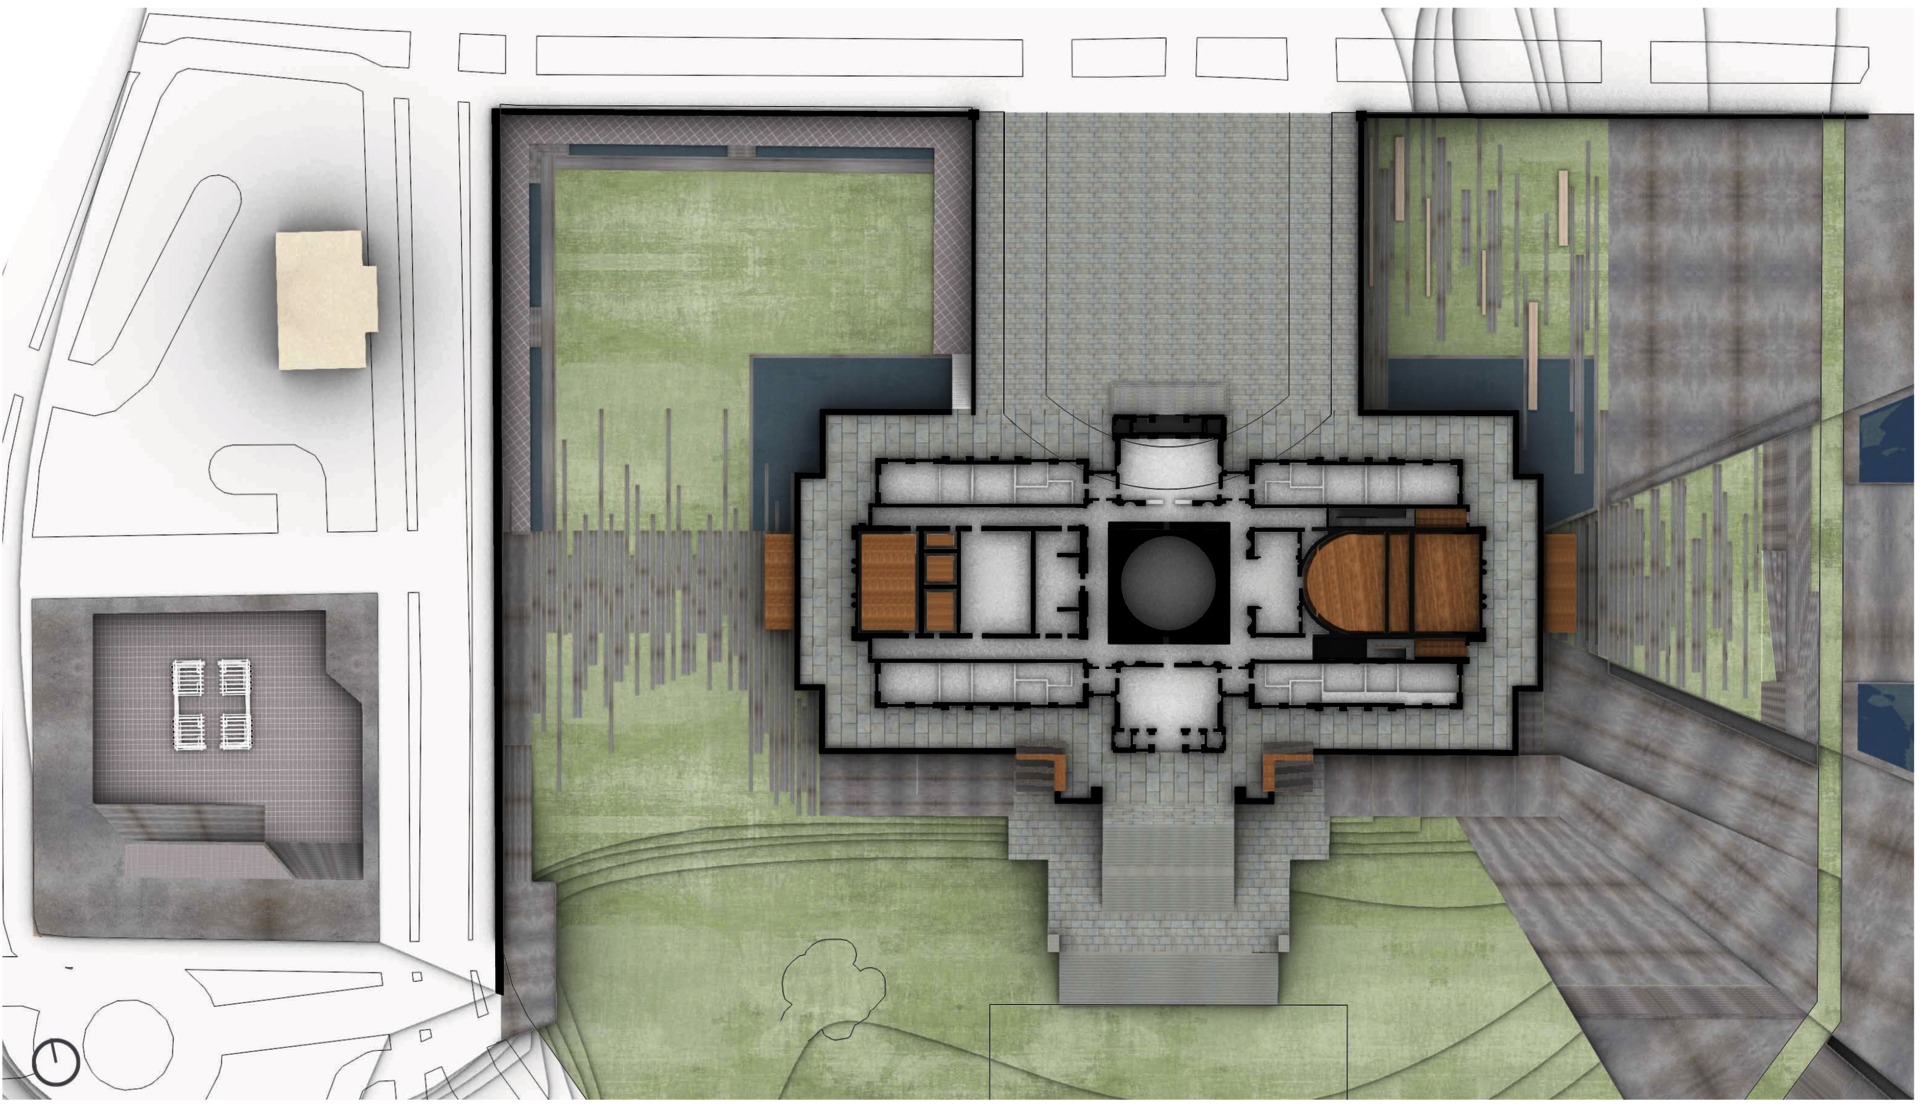 Basement plan showing the programmatic distribution of spaces, with theater on east axis, gallery area at the center, and educational area on west axis.